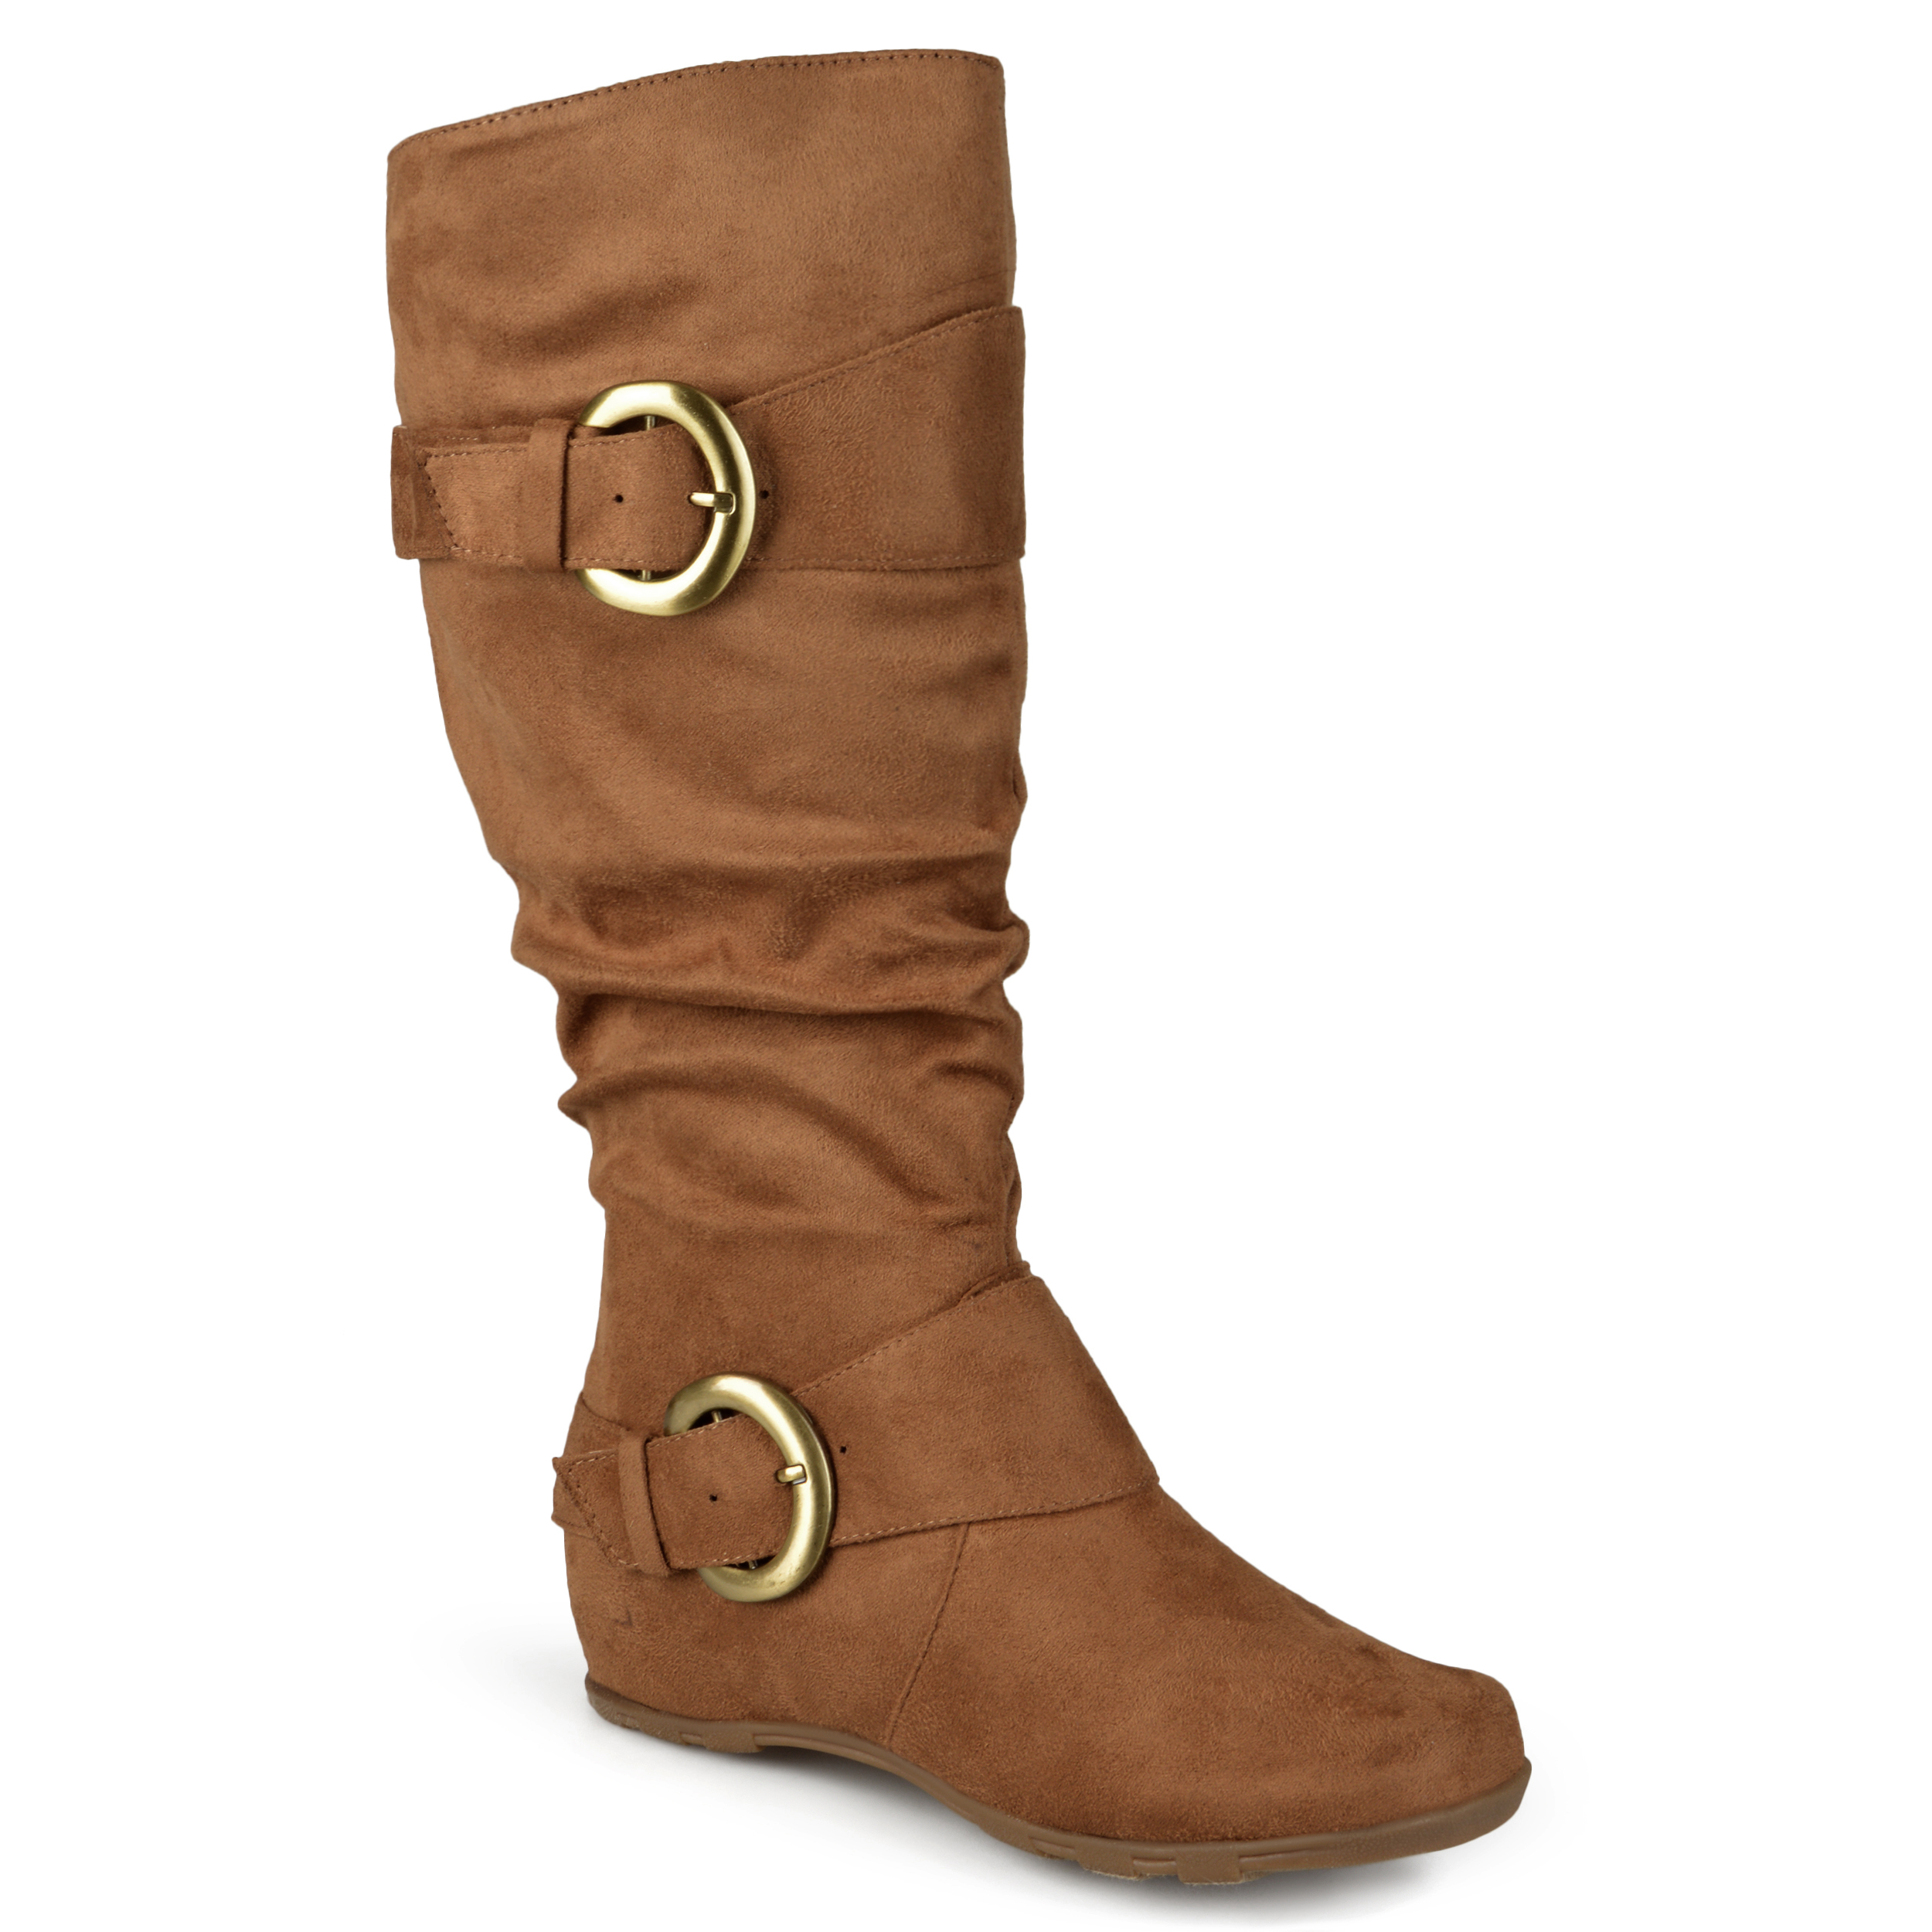 Brinley Co. Womens Wide Calf Dress Boot - image 1 of 8